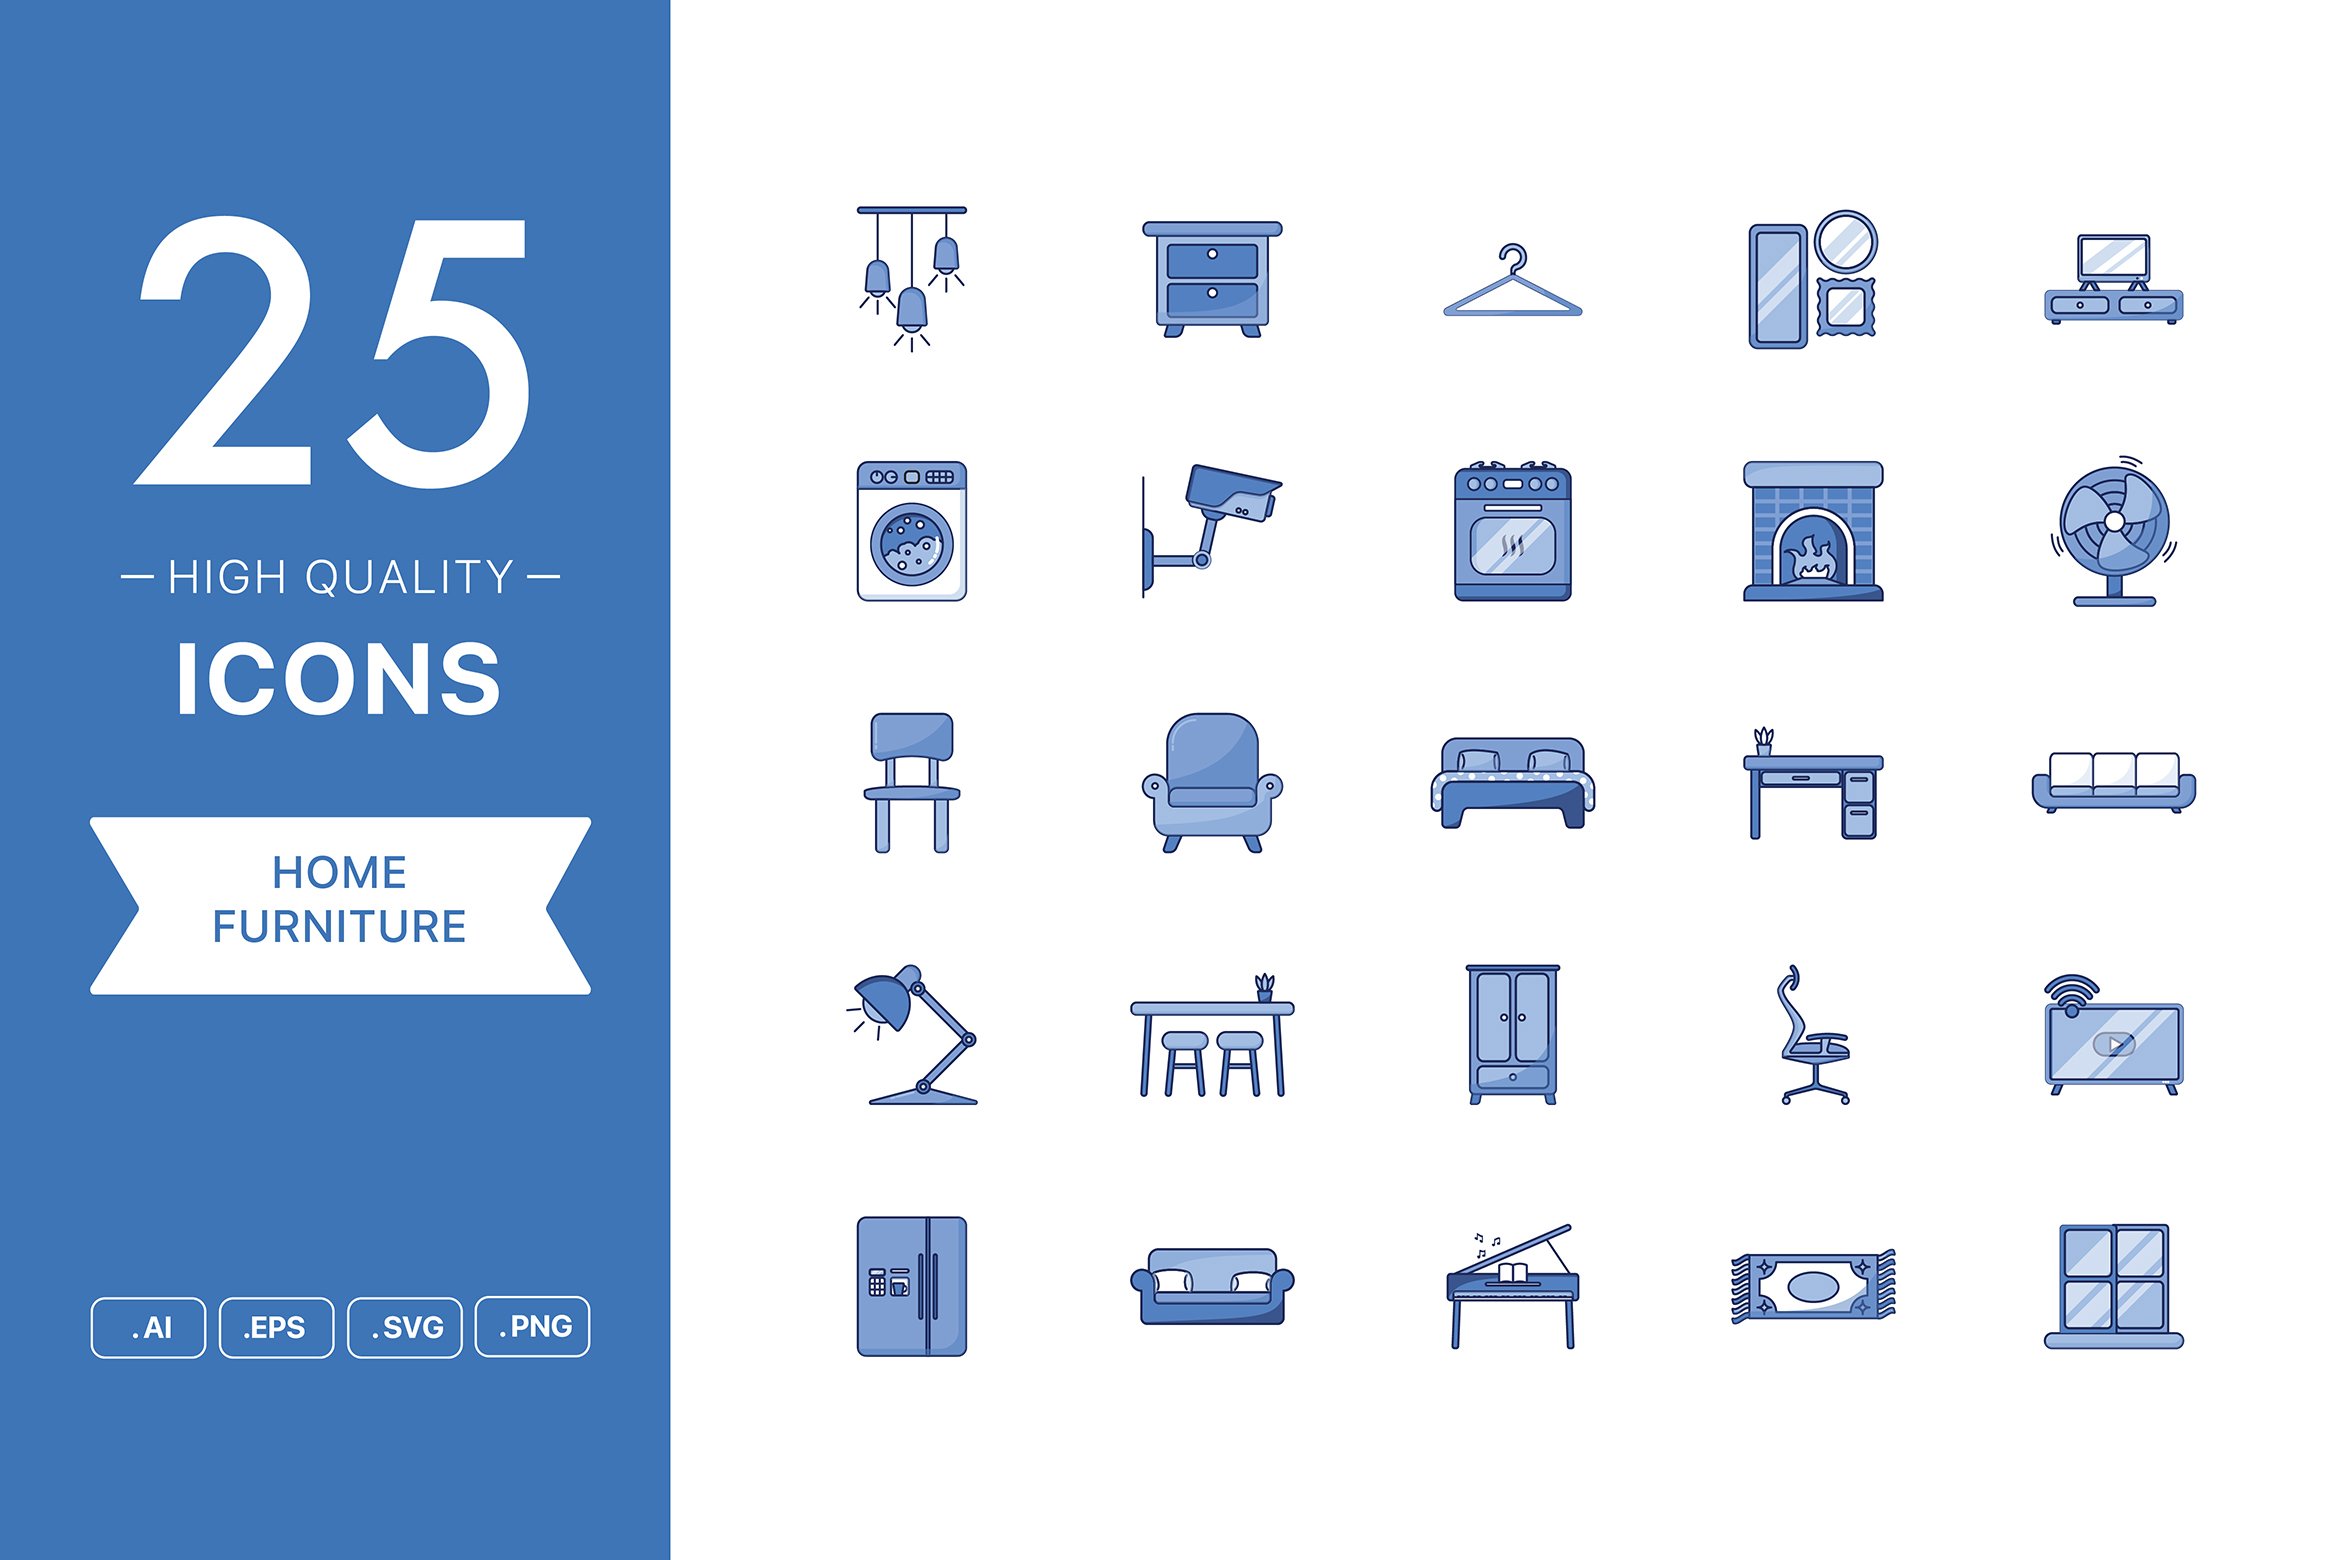 Home Furniture Icon Set cover image.